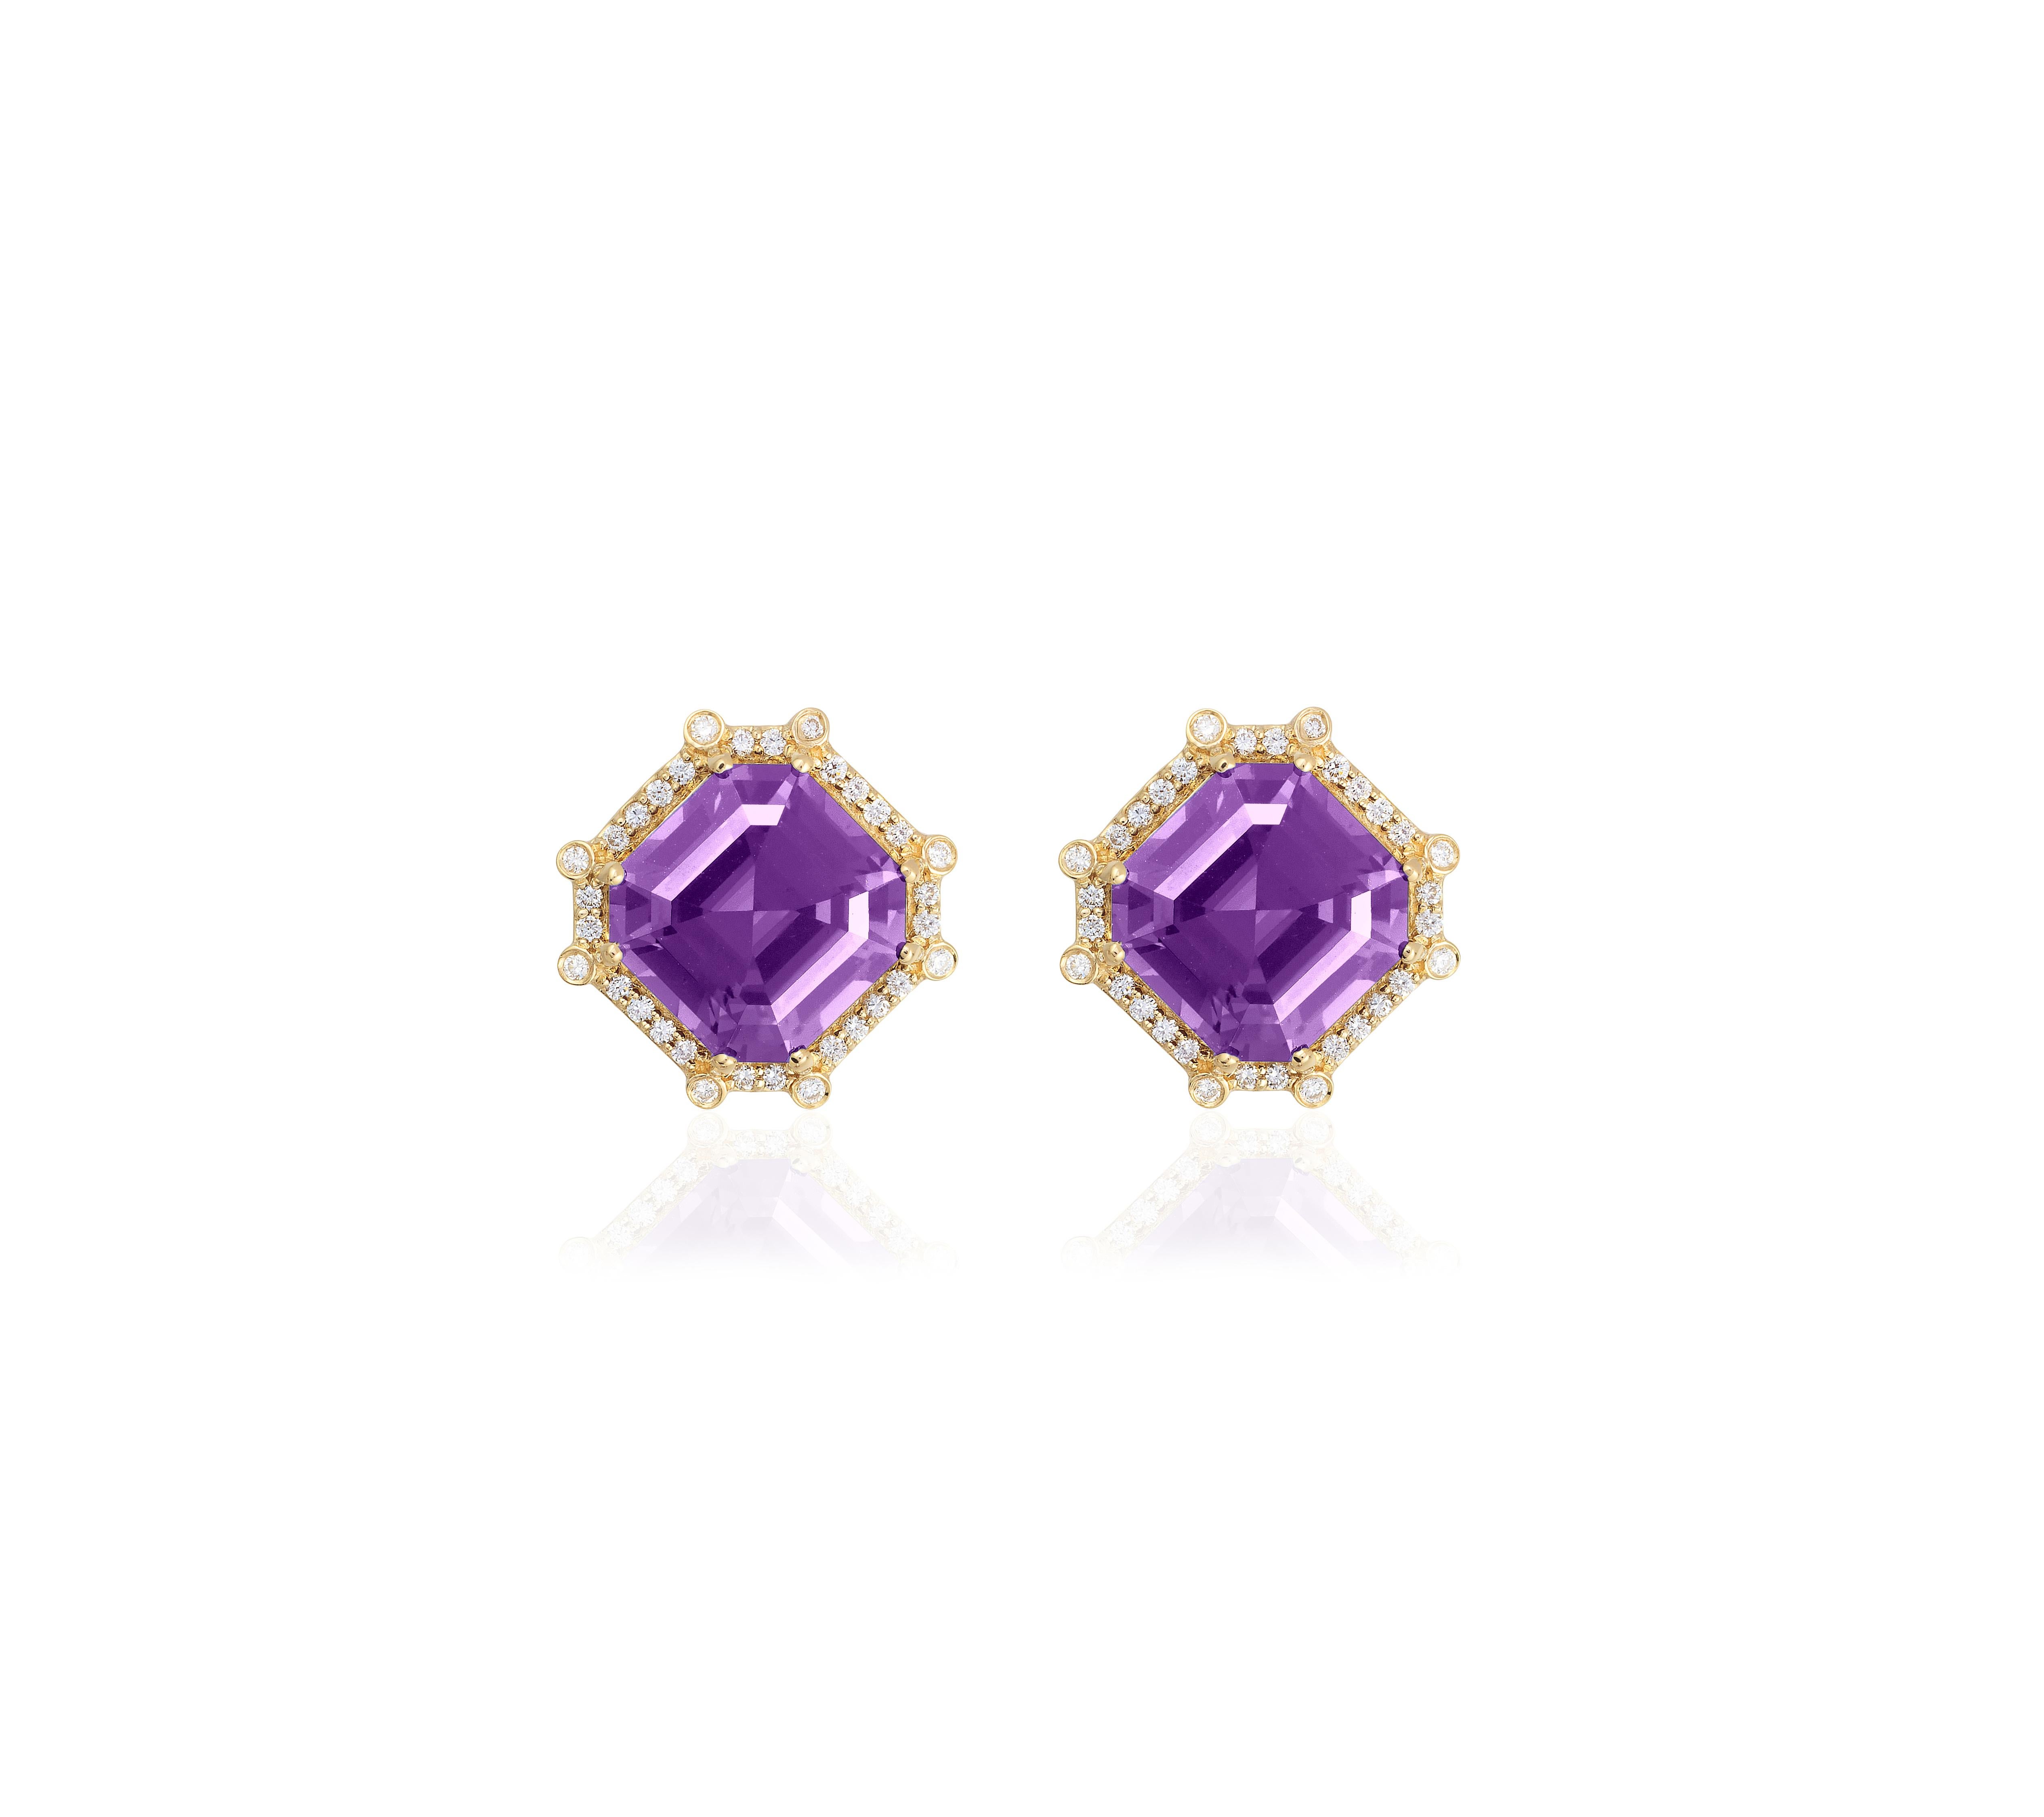 14k gold diamond earring with octagon amethyst